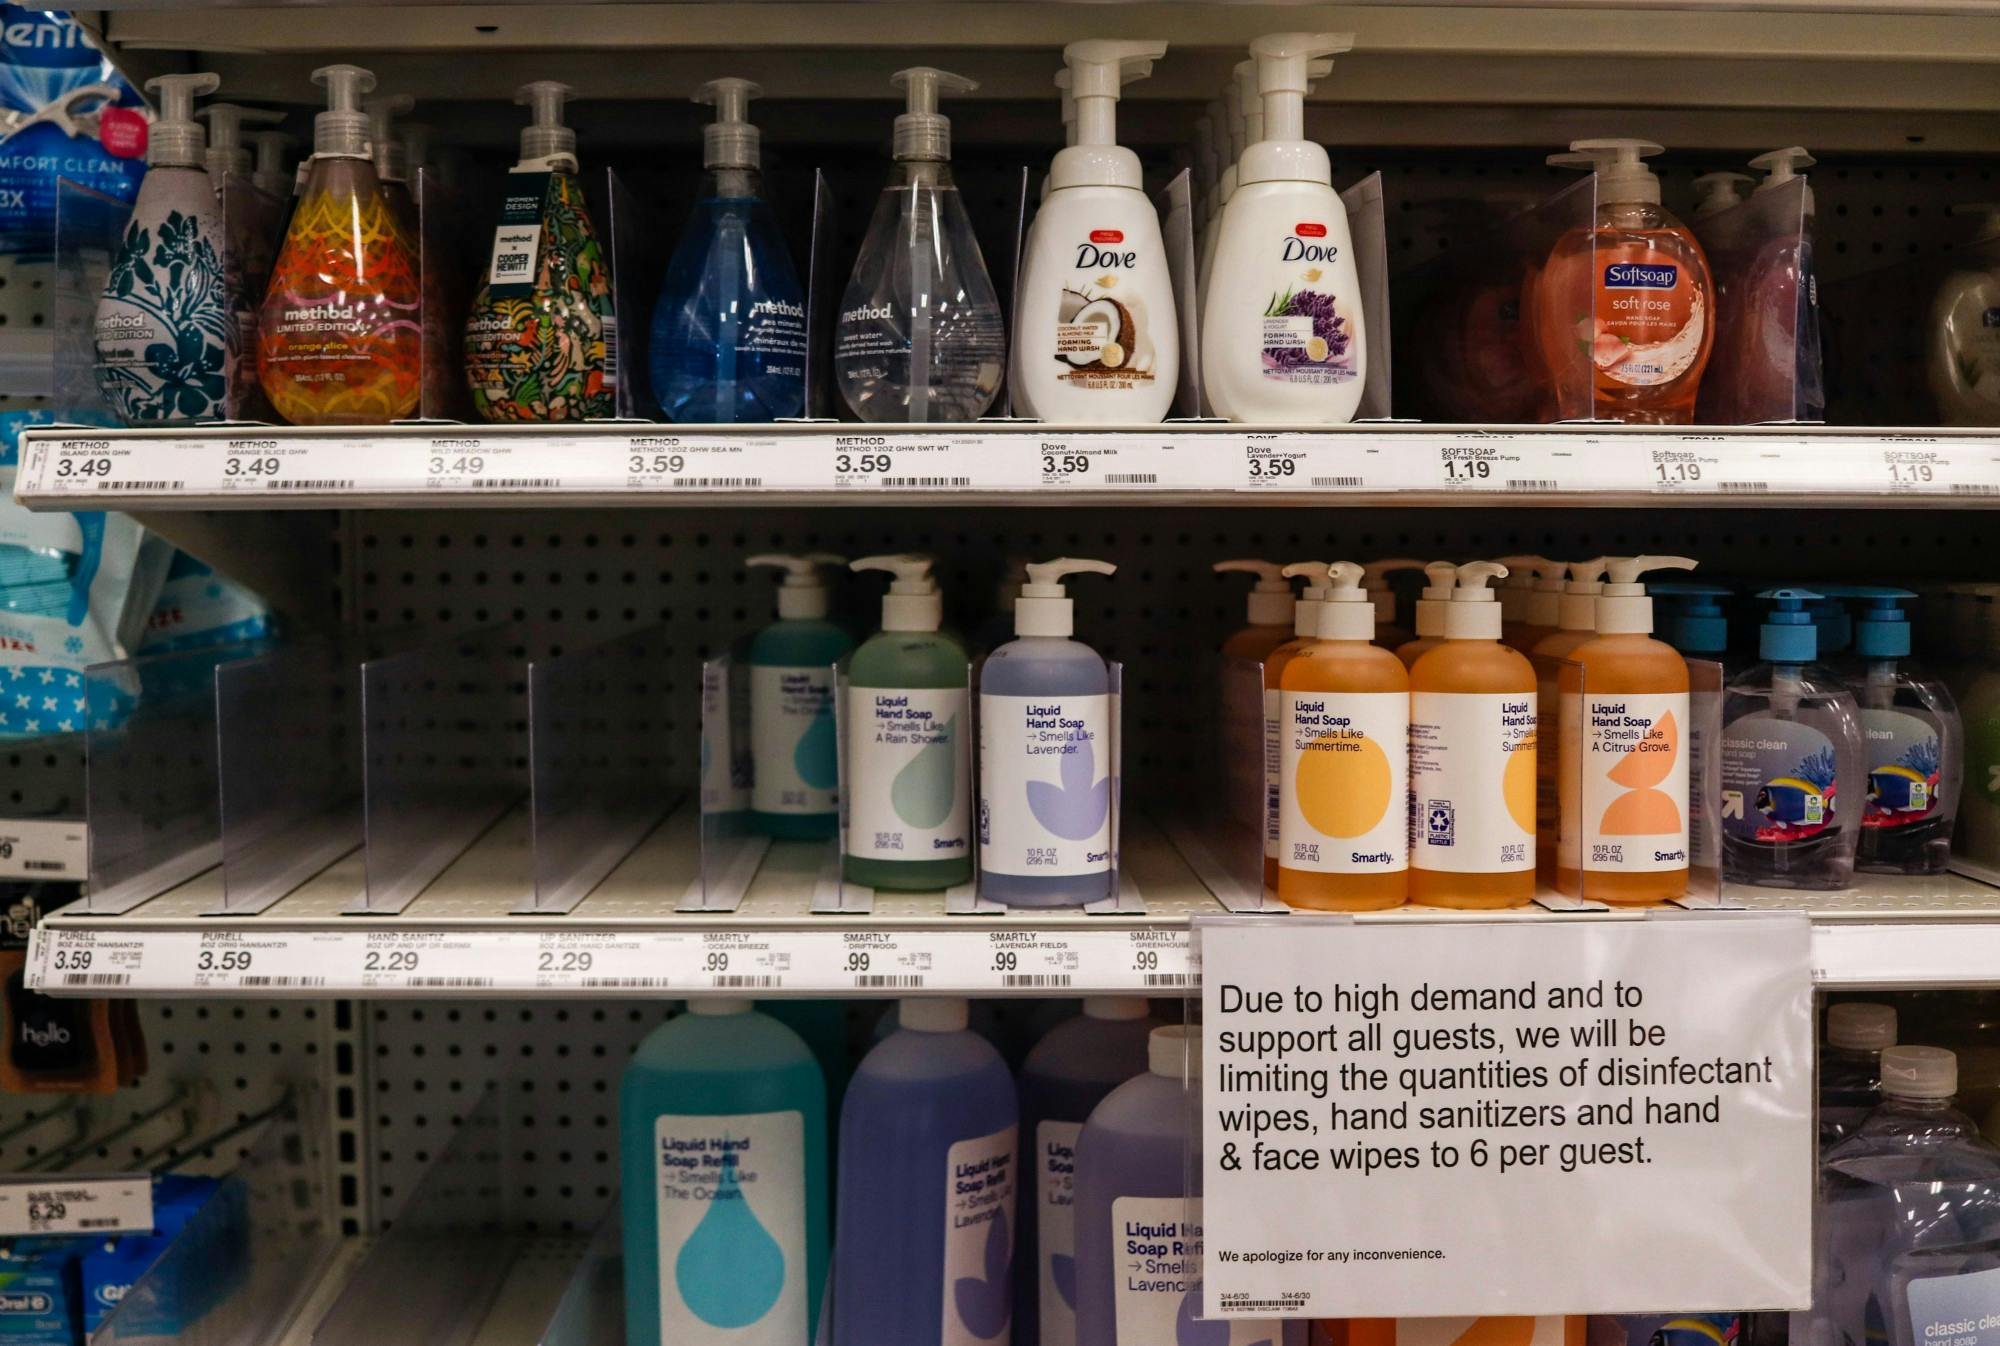 Bottles of soap and hand sanitizer sit on grocery store shelves.